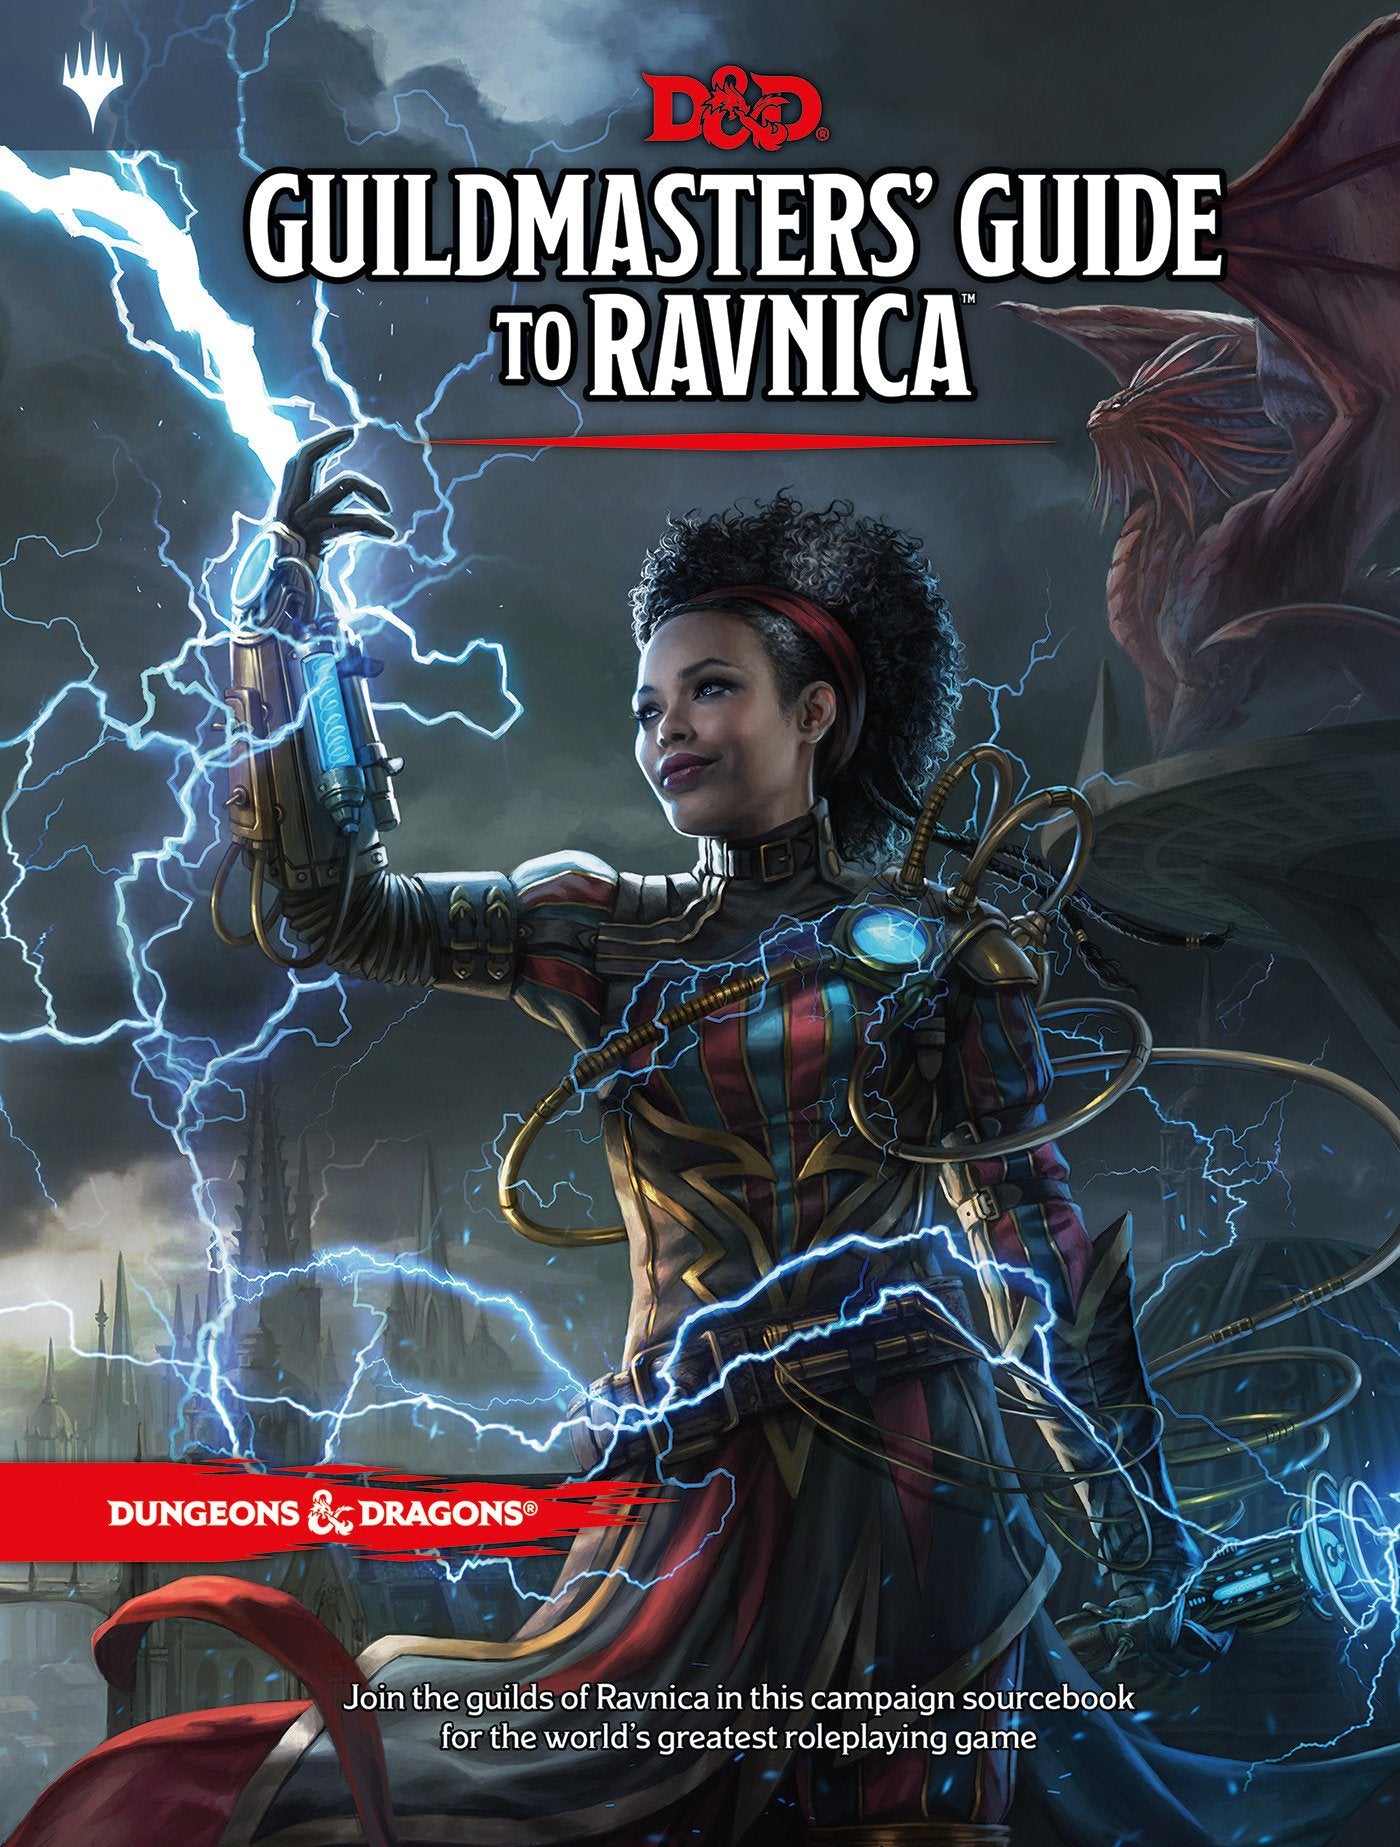 Dungeons and Dragons 5e - Guildmaster's Guide to Ravnica